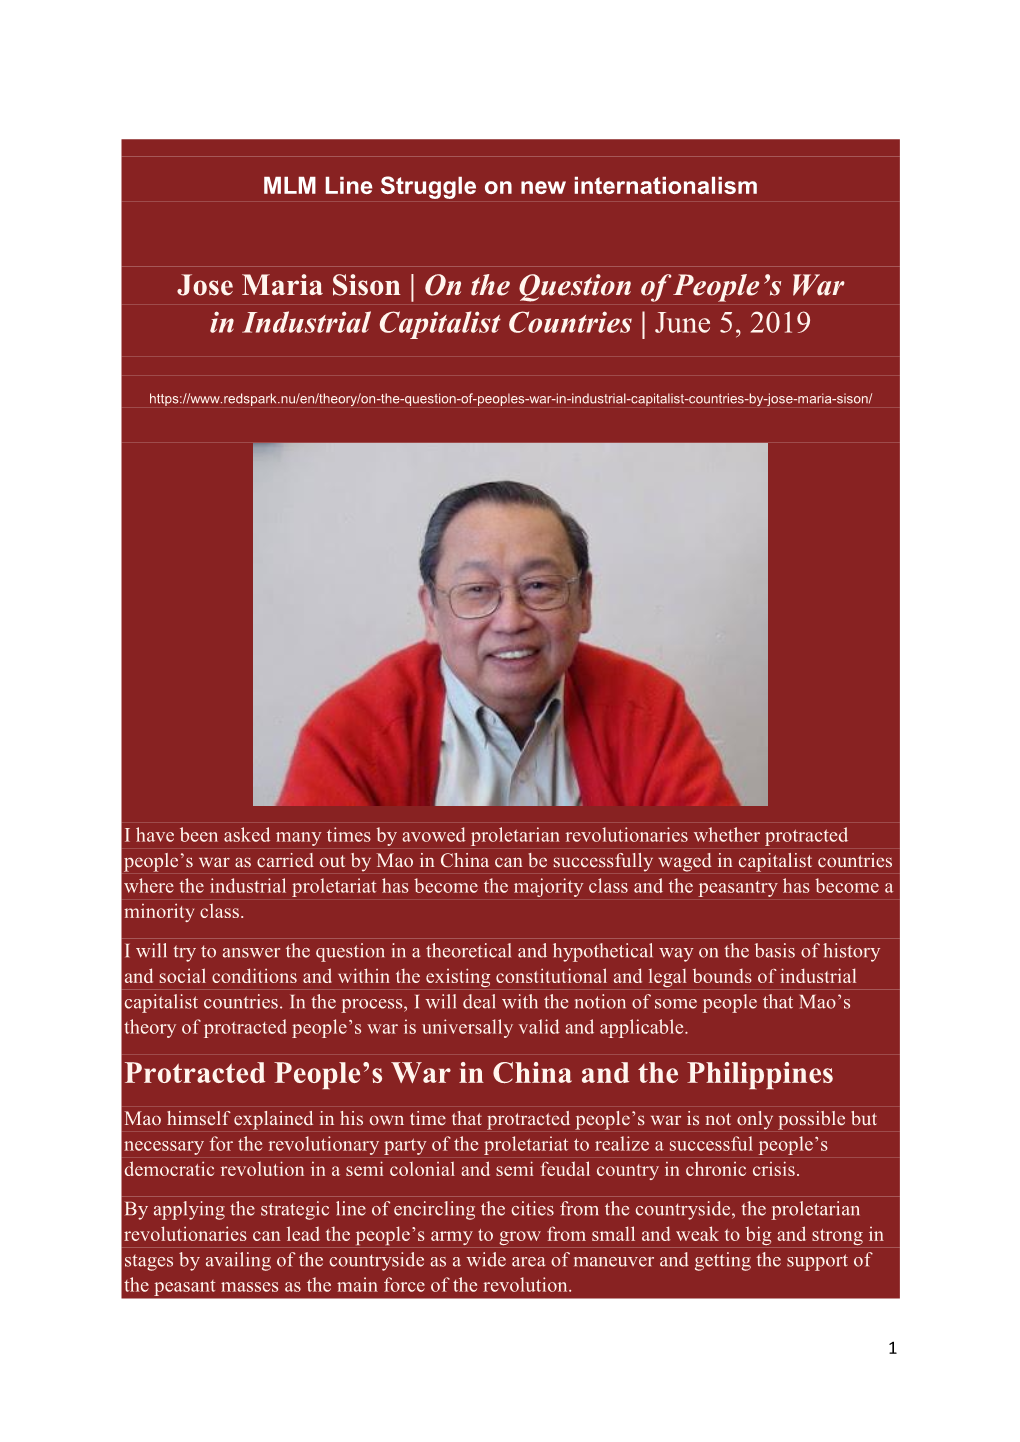 Jose Maria Sison | on the Question of People's War in Industrial Capitalist